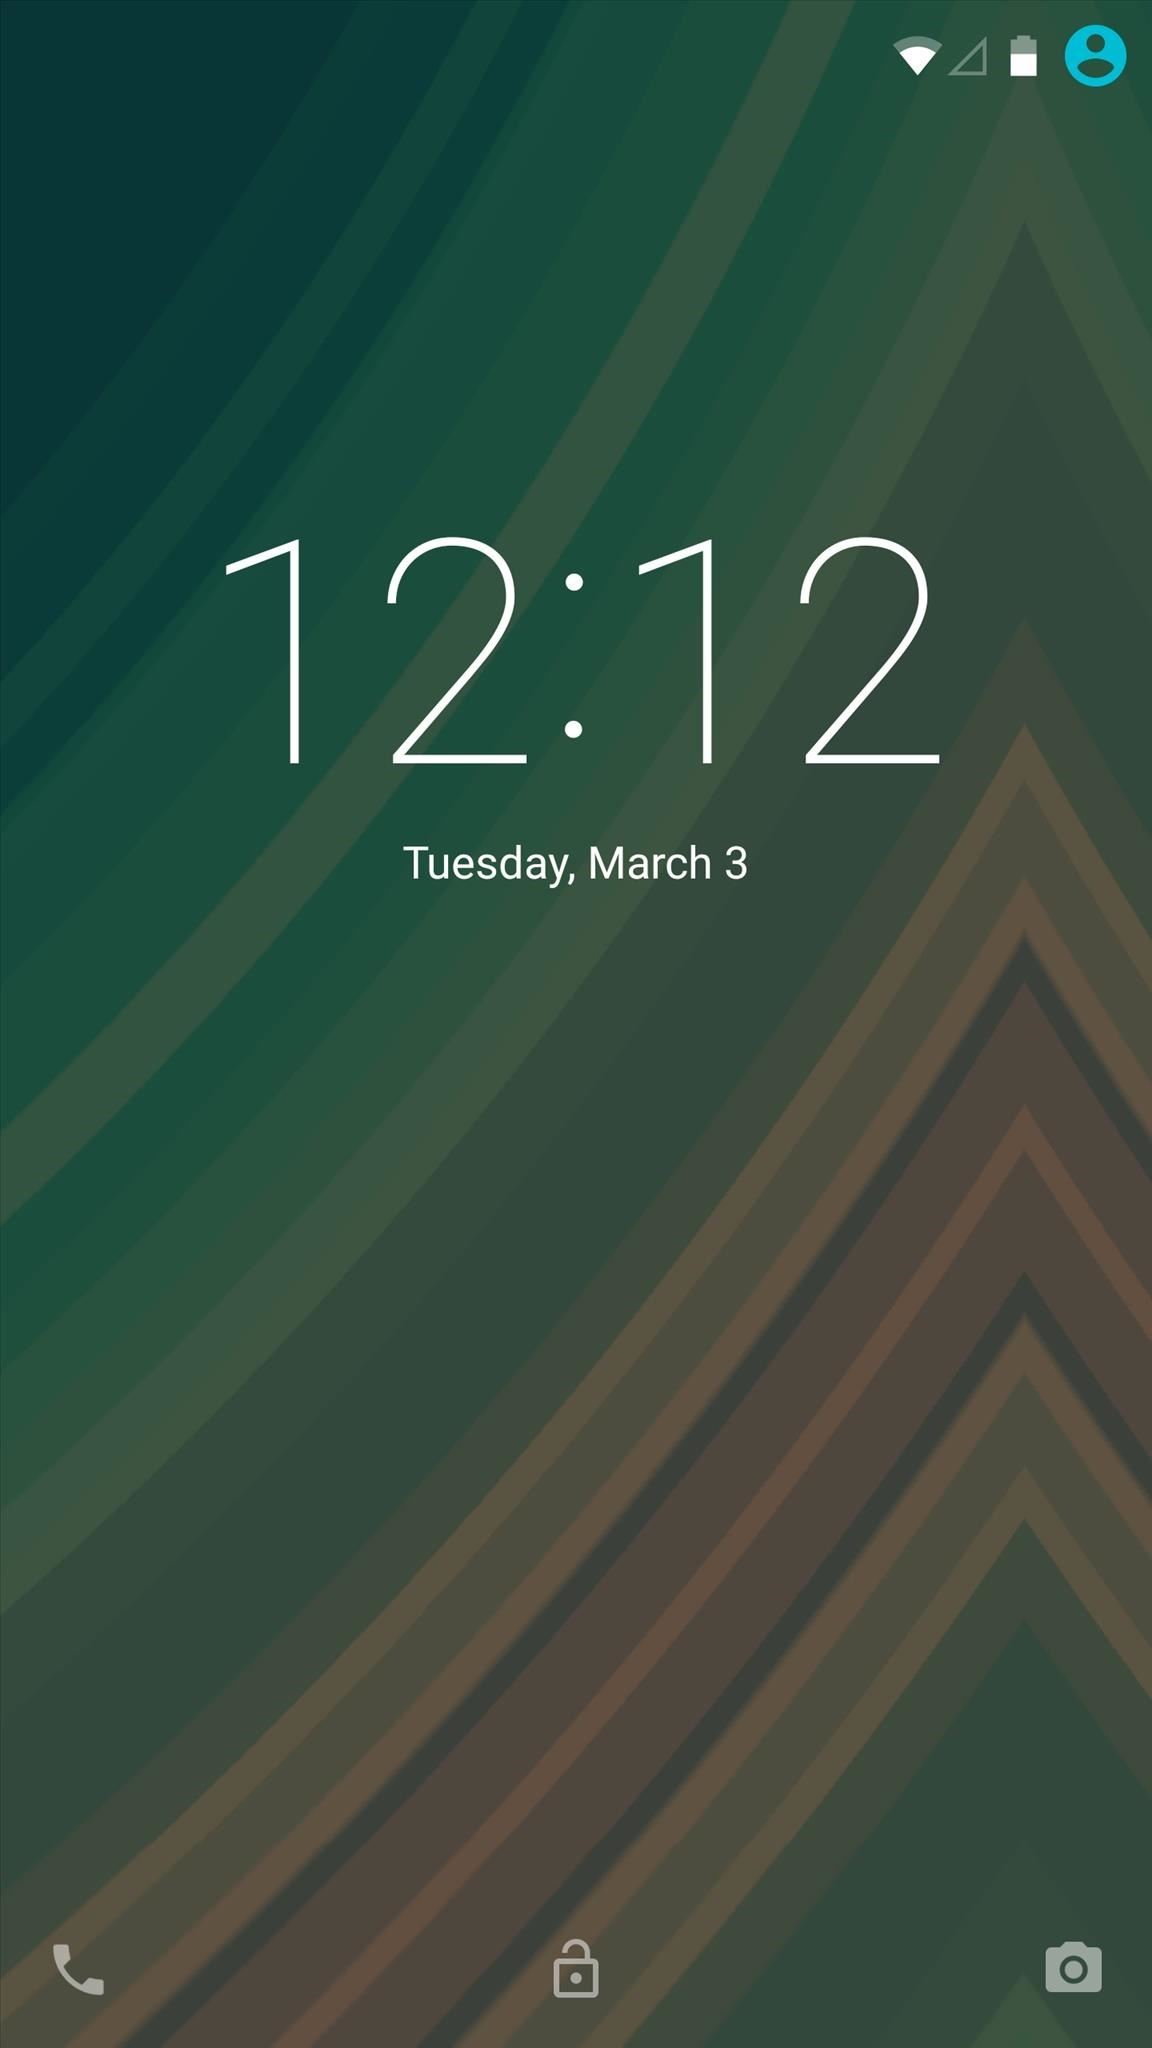 How to Remove the Carrier Name from Your Lock Screen in Android Lollipop